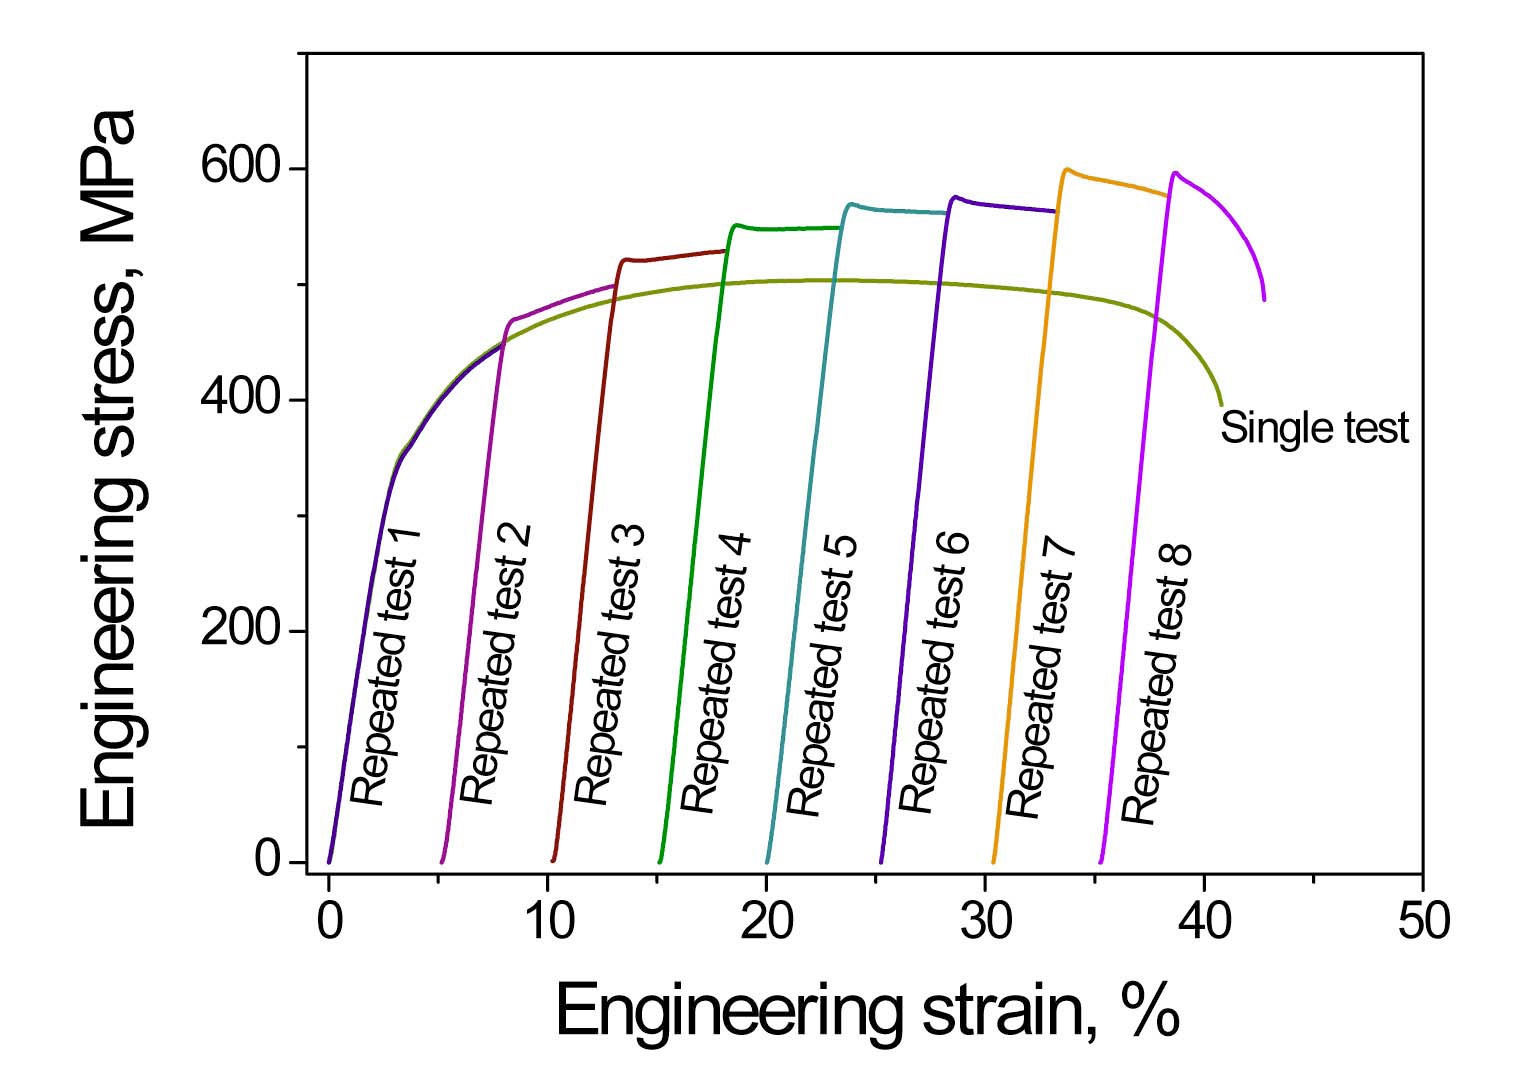 Comparison of Stress-strain Curves between Single Test and Repeated Tests at a 5% Strain of T-1 Alloy